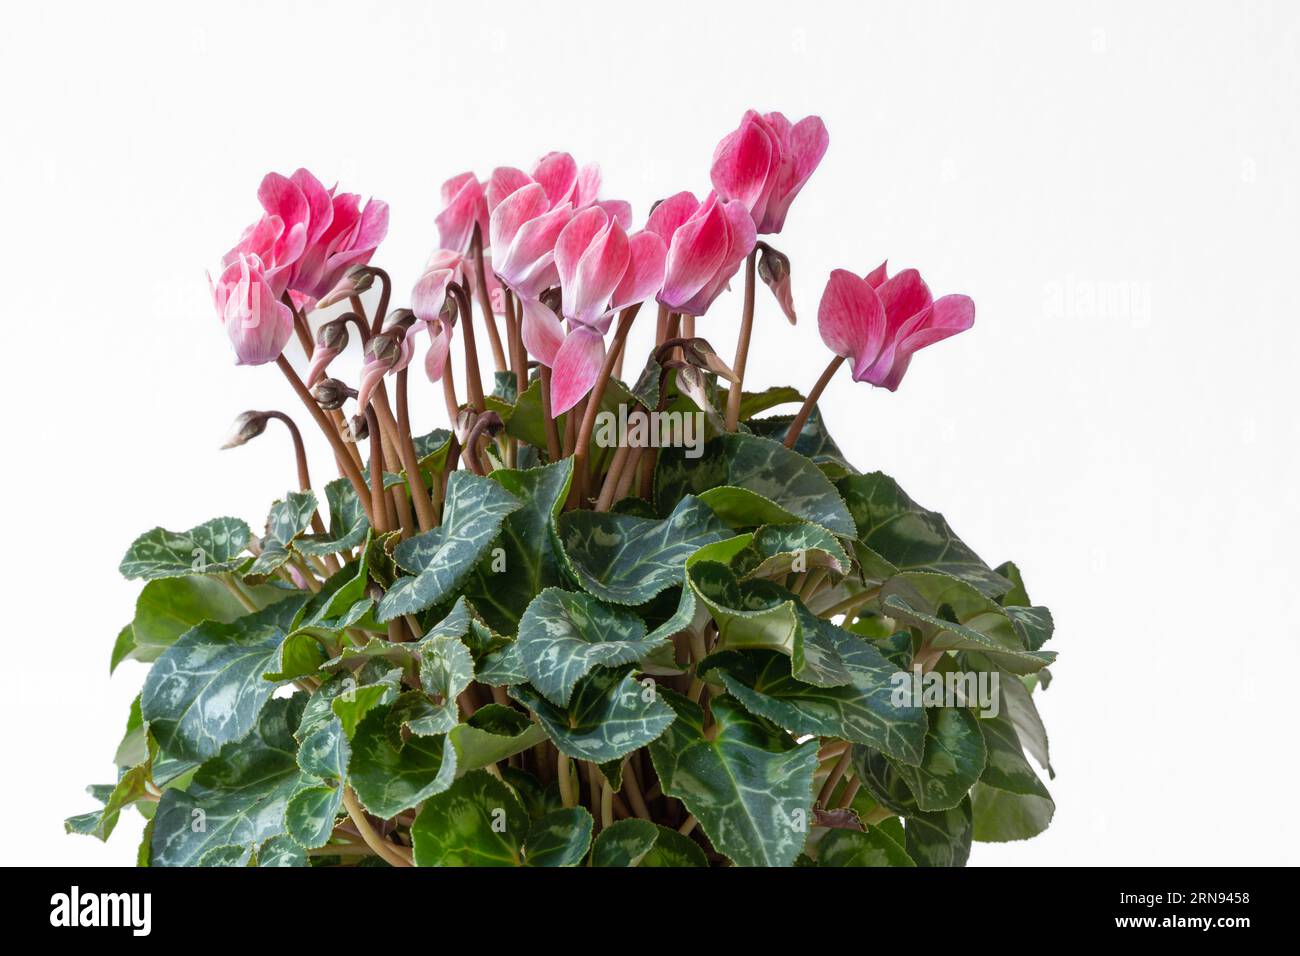 Closeup view of cyclamen houseplant with bright pink flowers blooming isolated on white background Stock Photo